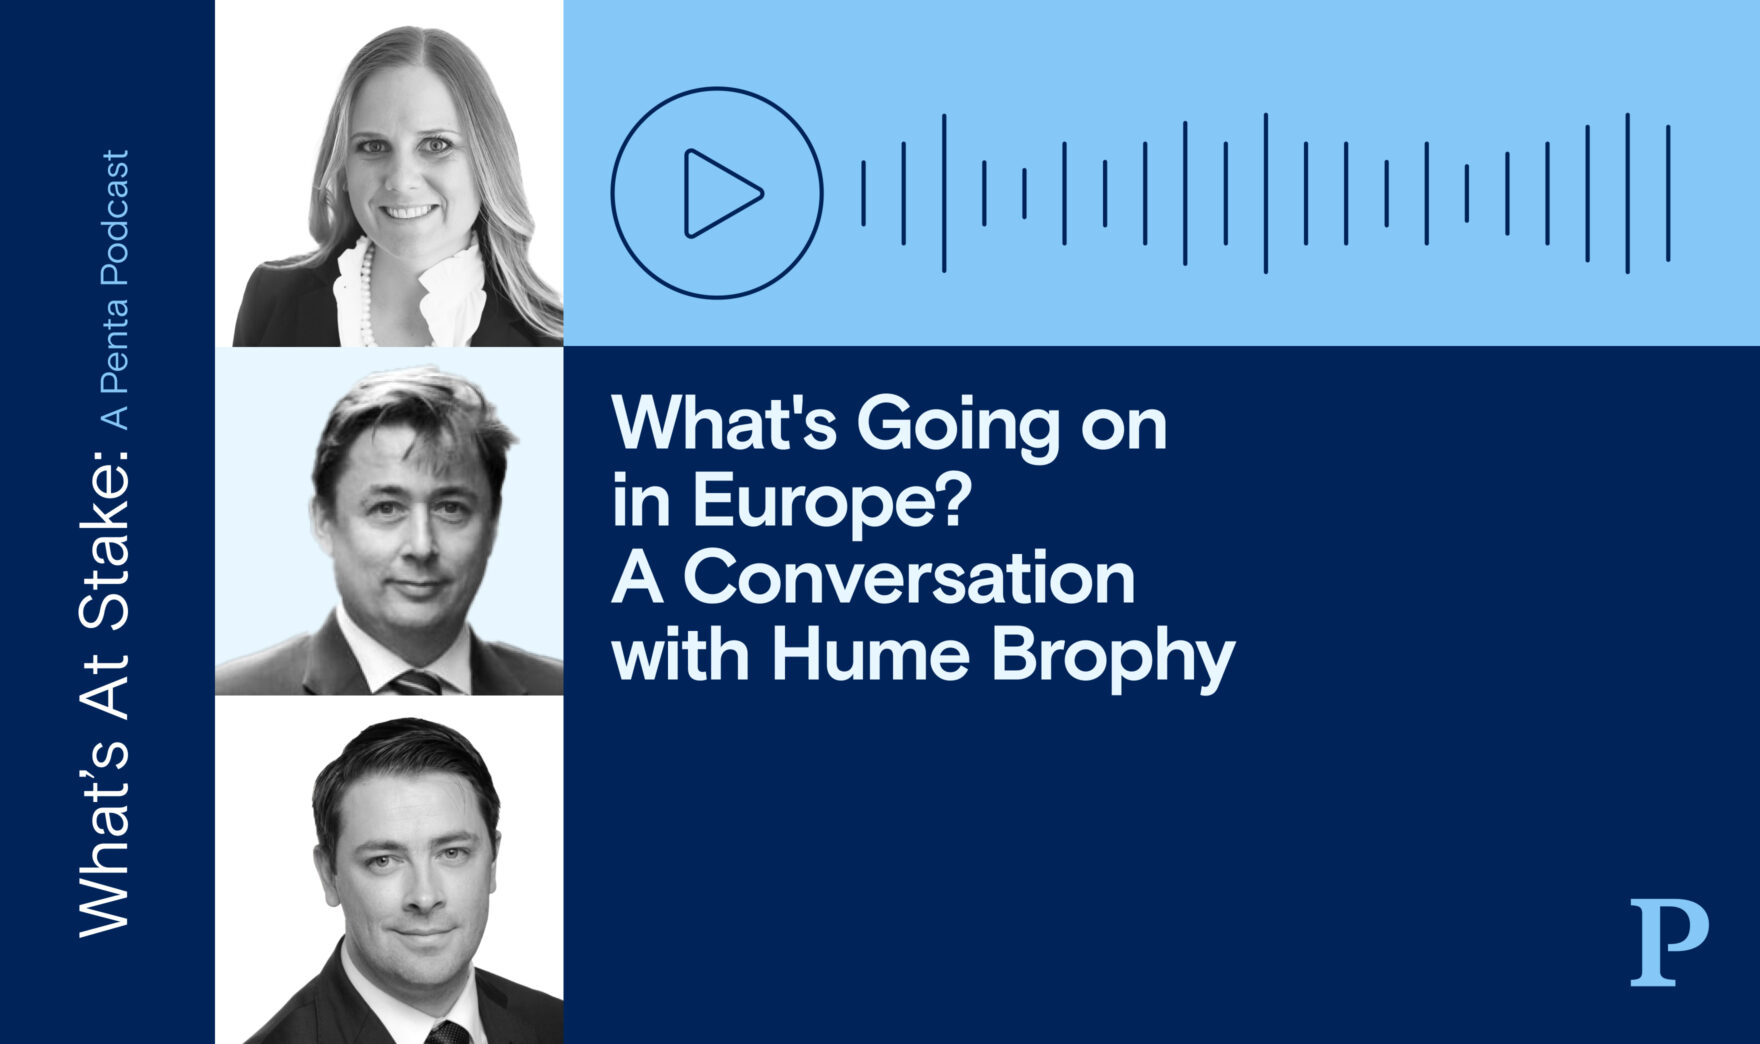 What’s Going on in Europe? A Conversation with Hume Brophy